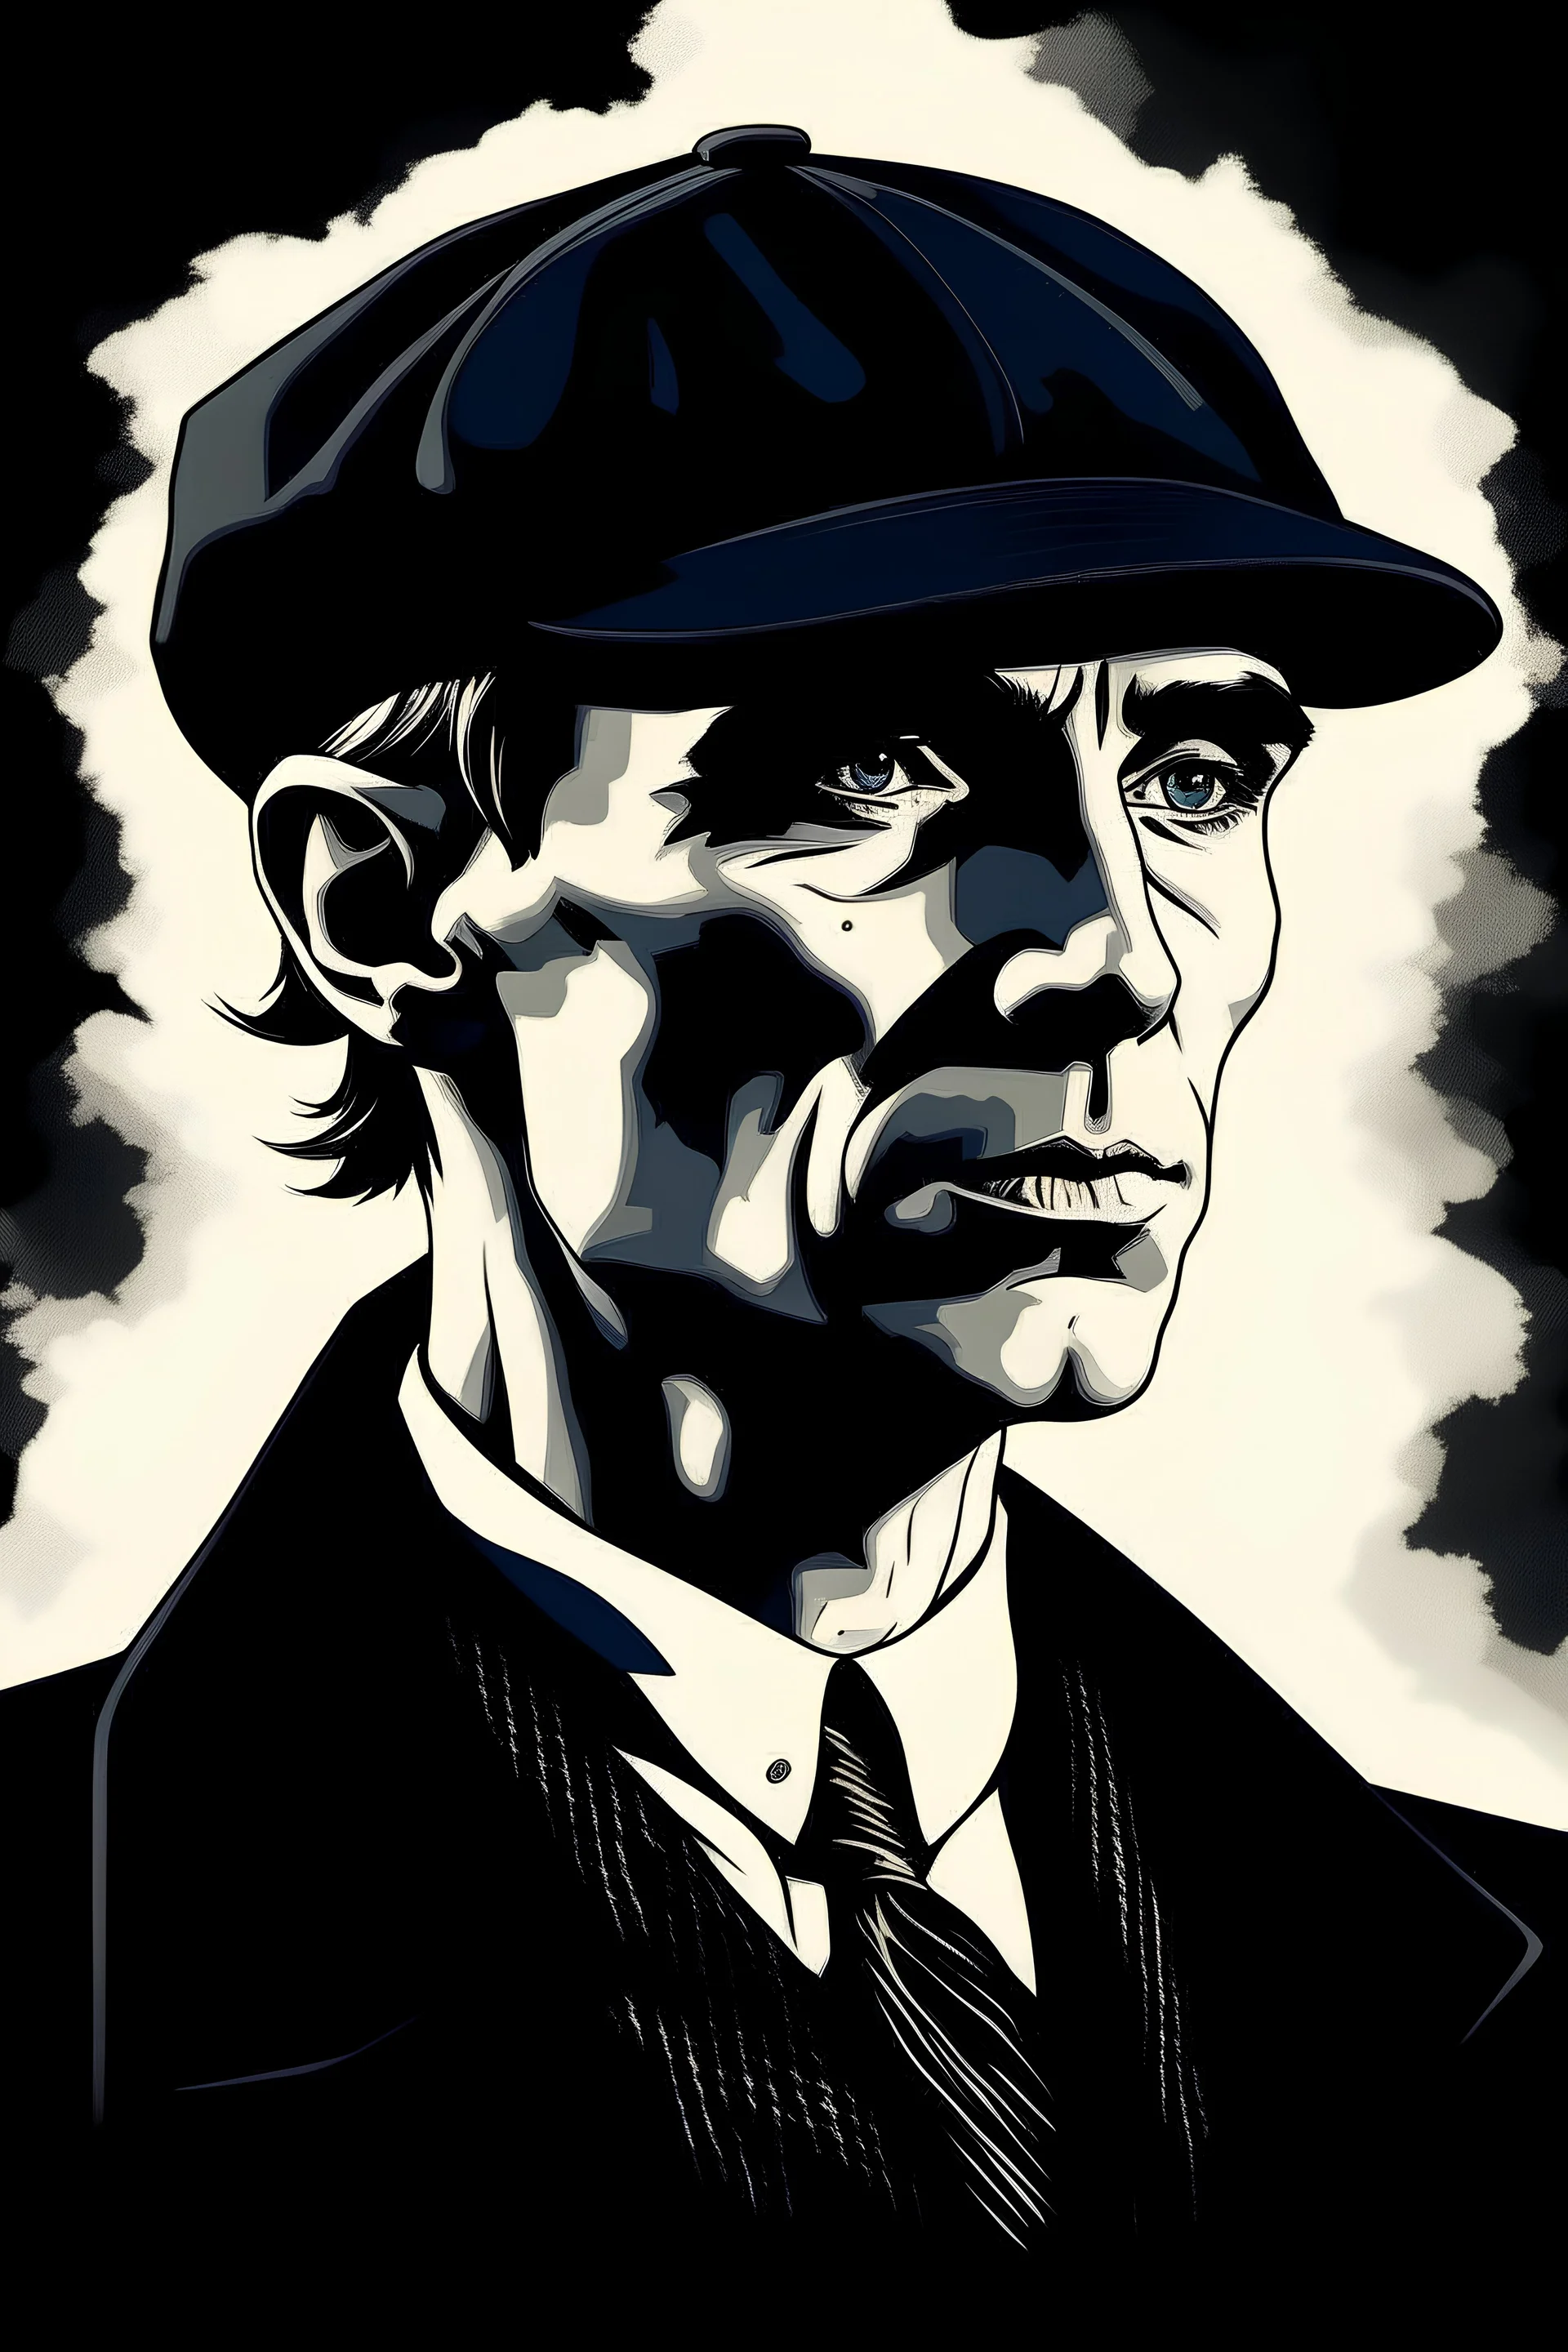 Peaky Blinder as from the TV series Peaky Blinders, graphic illustration, without human